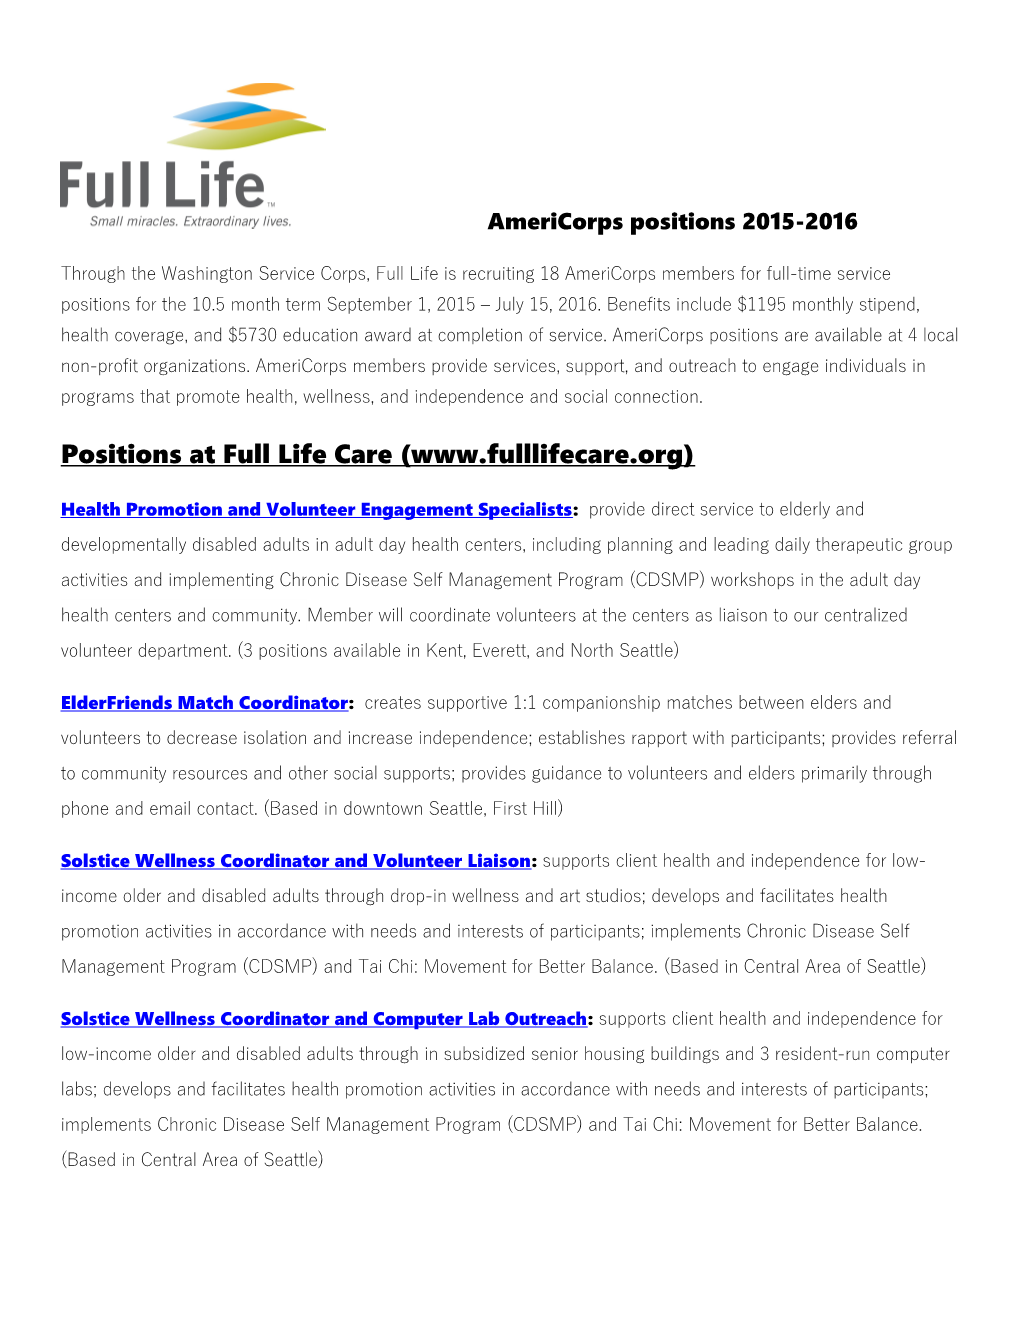 Positions at Full Life Care (